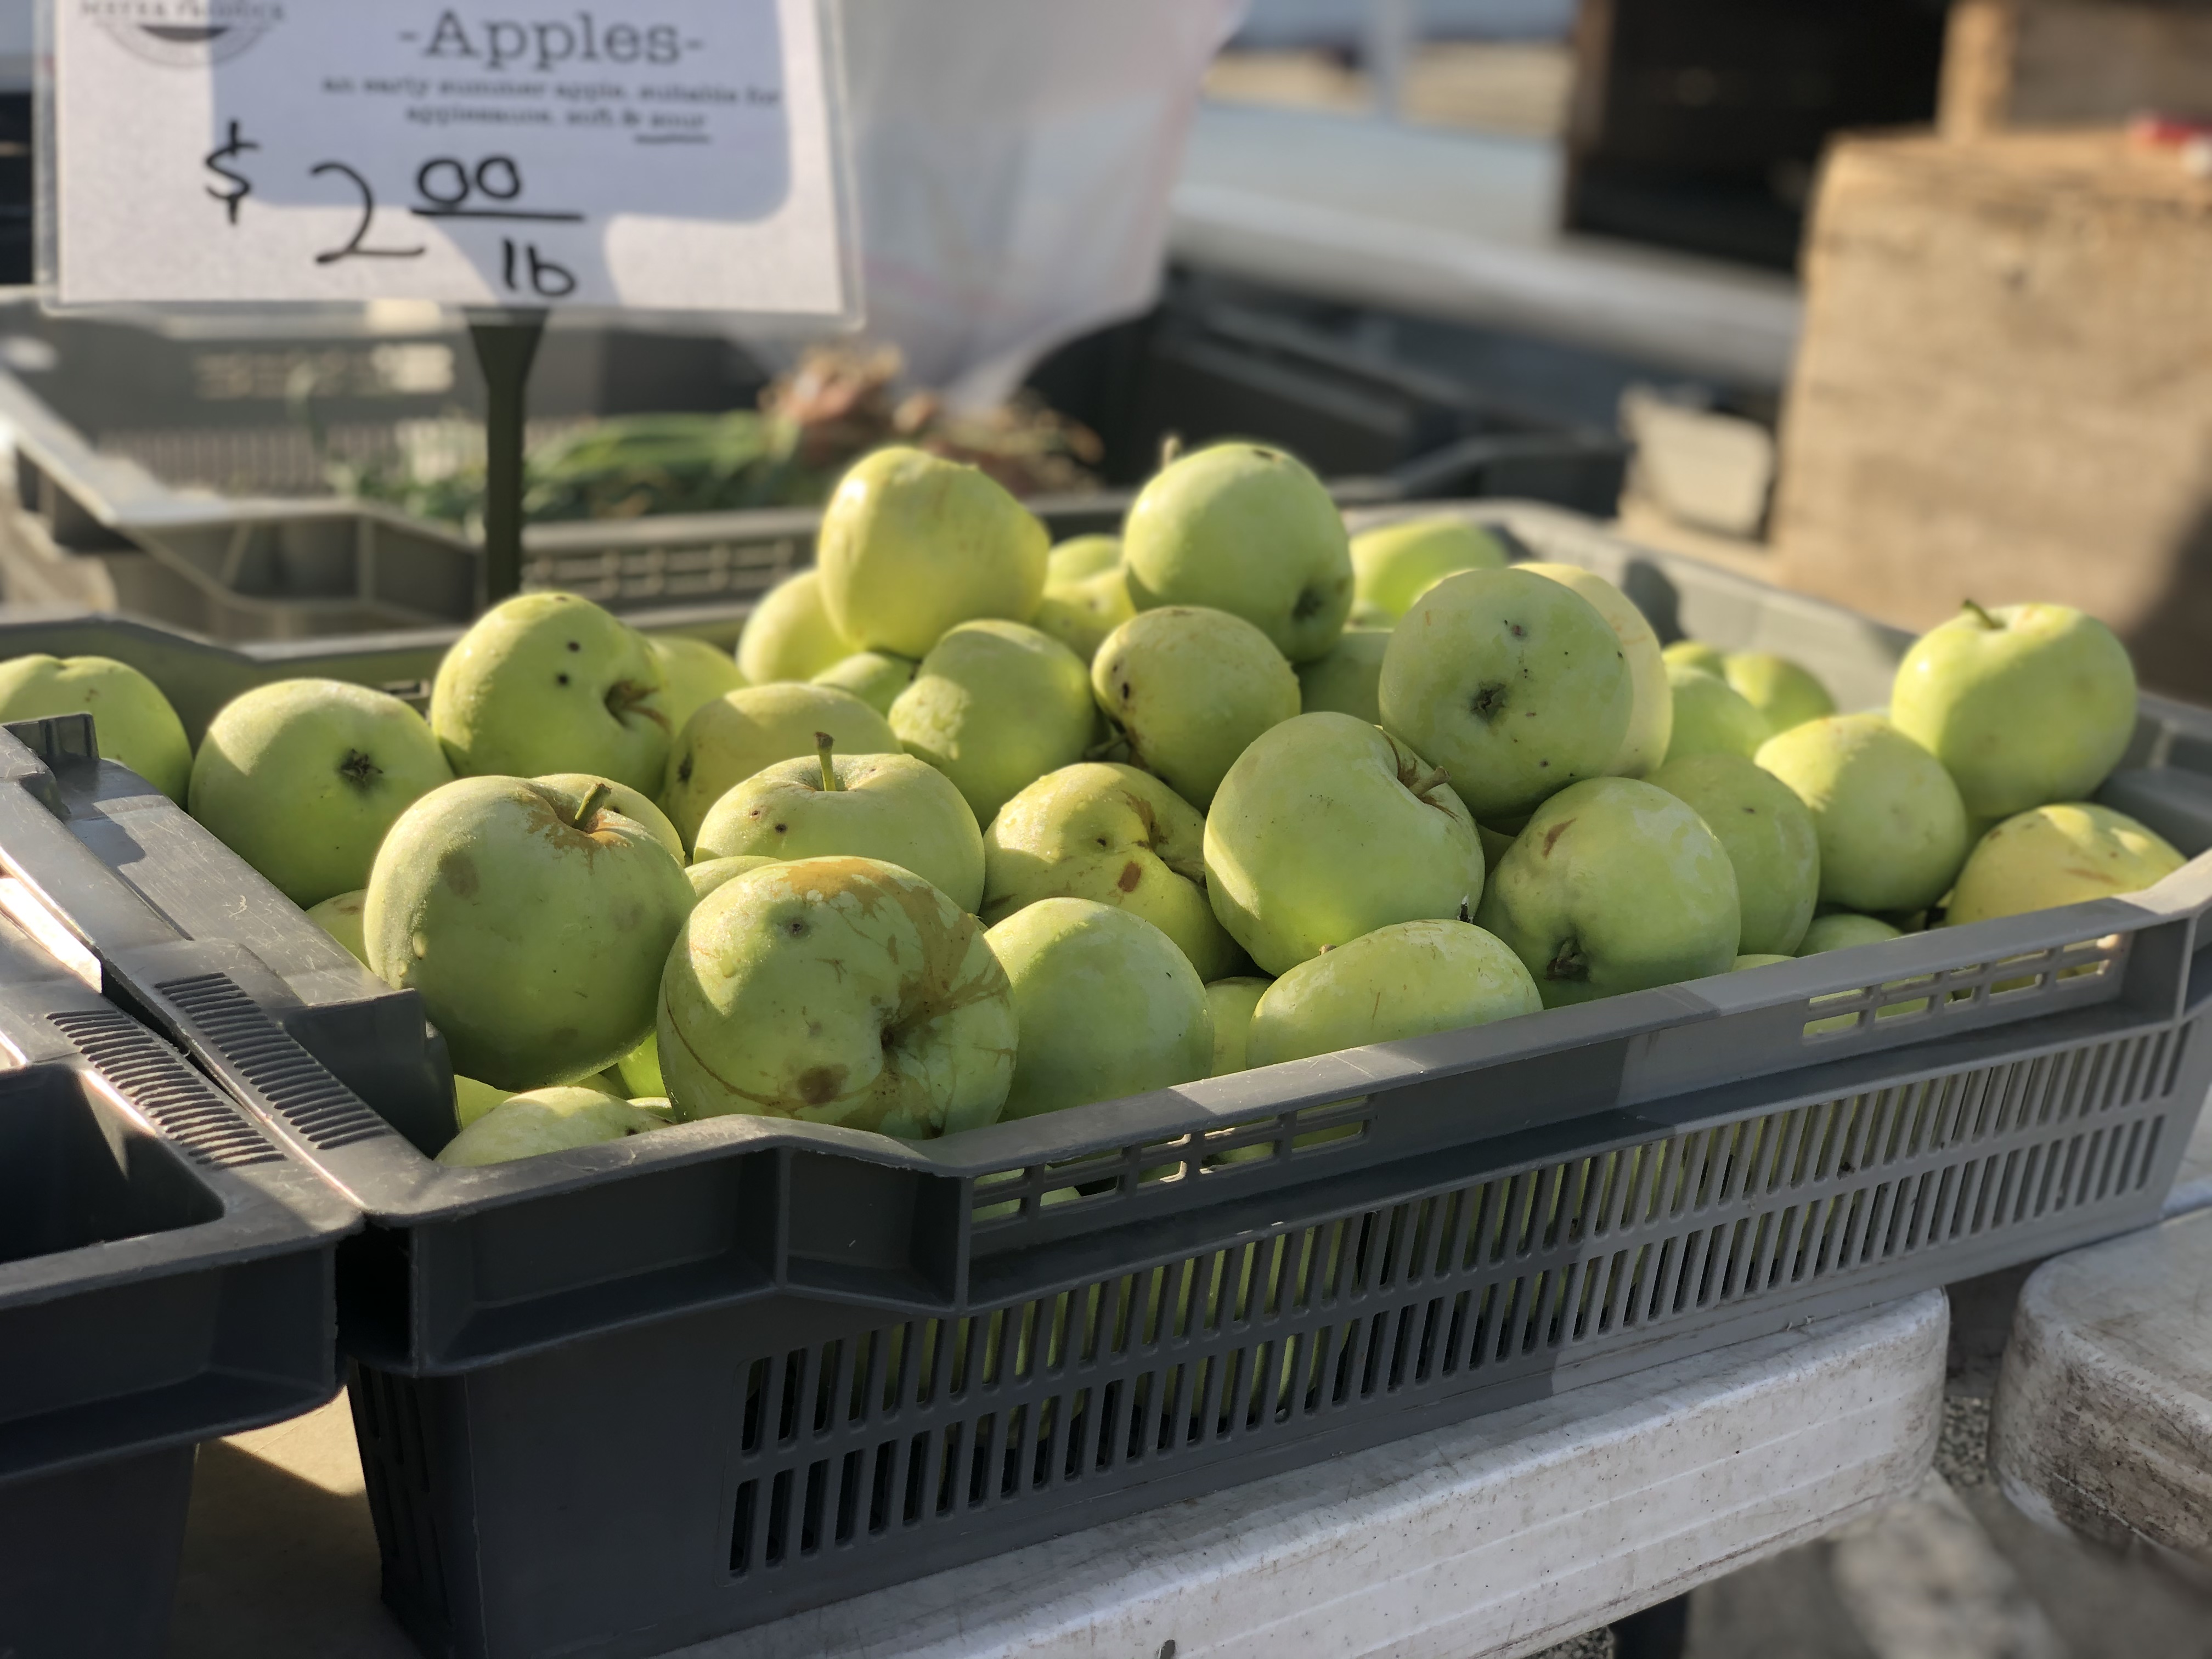 A gray container holds yellow apples at the Urbana's Market in the Square. Photo by Alyssa Buckley.